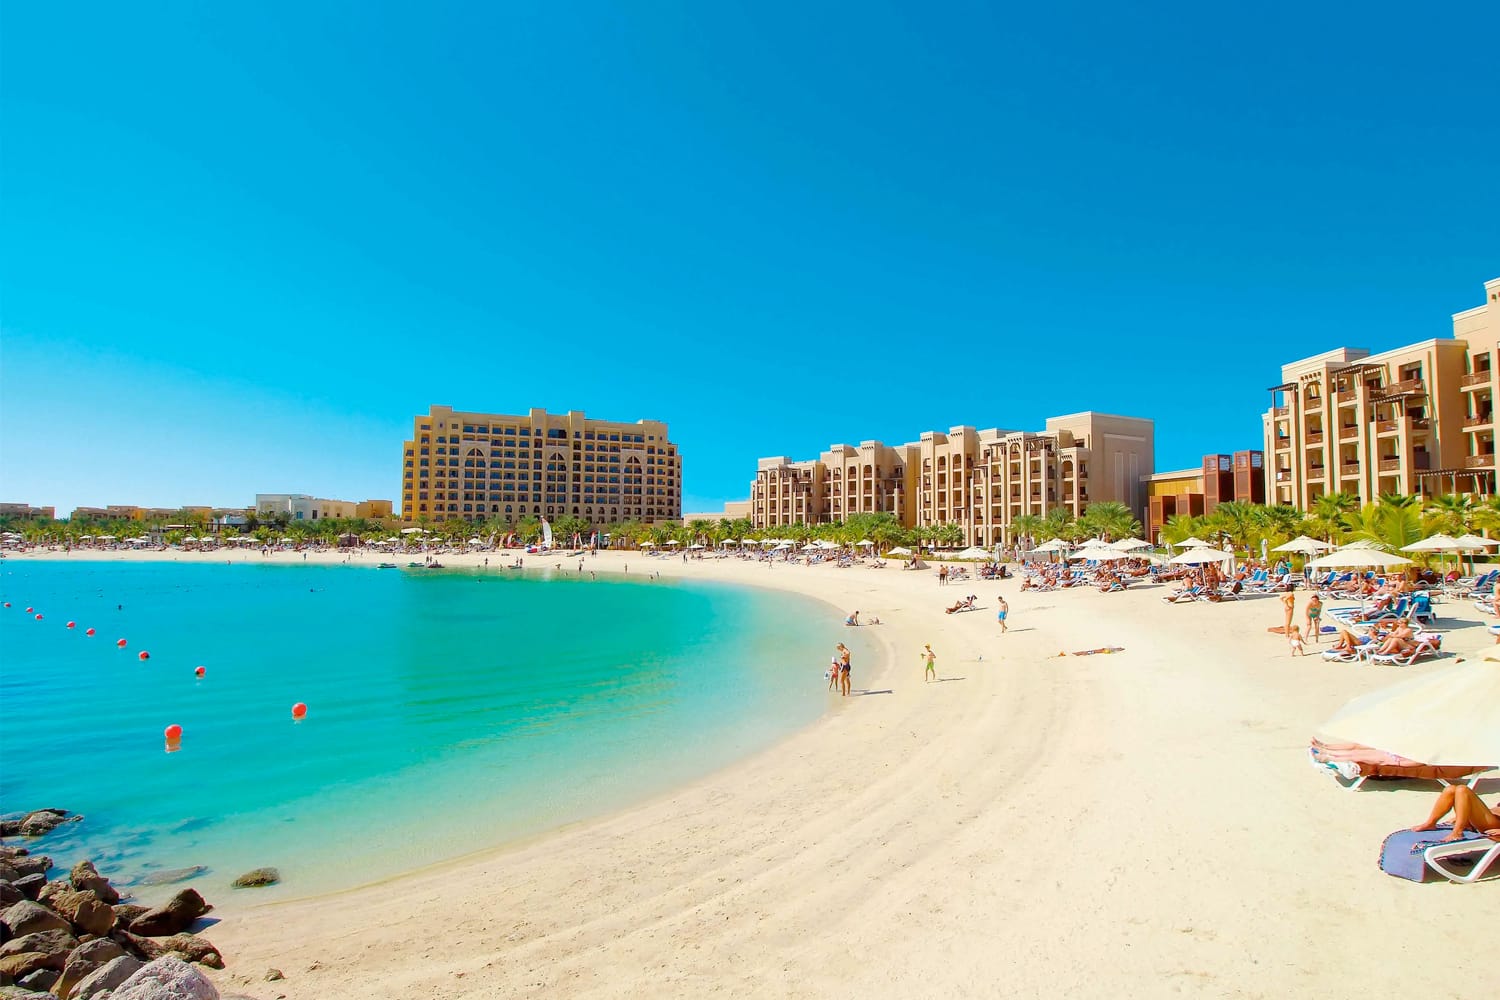 Private beach of Double Tree by Hilton Resort and Spa in Ras Al Khaimah, UAE